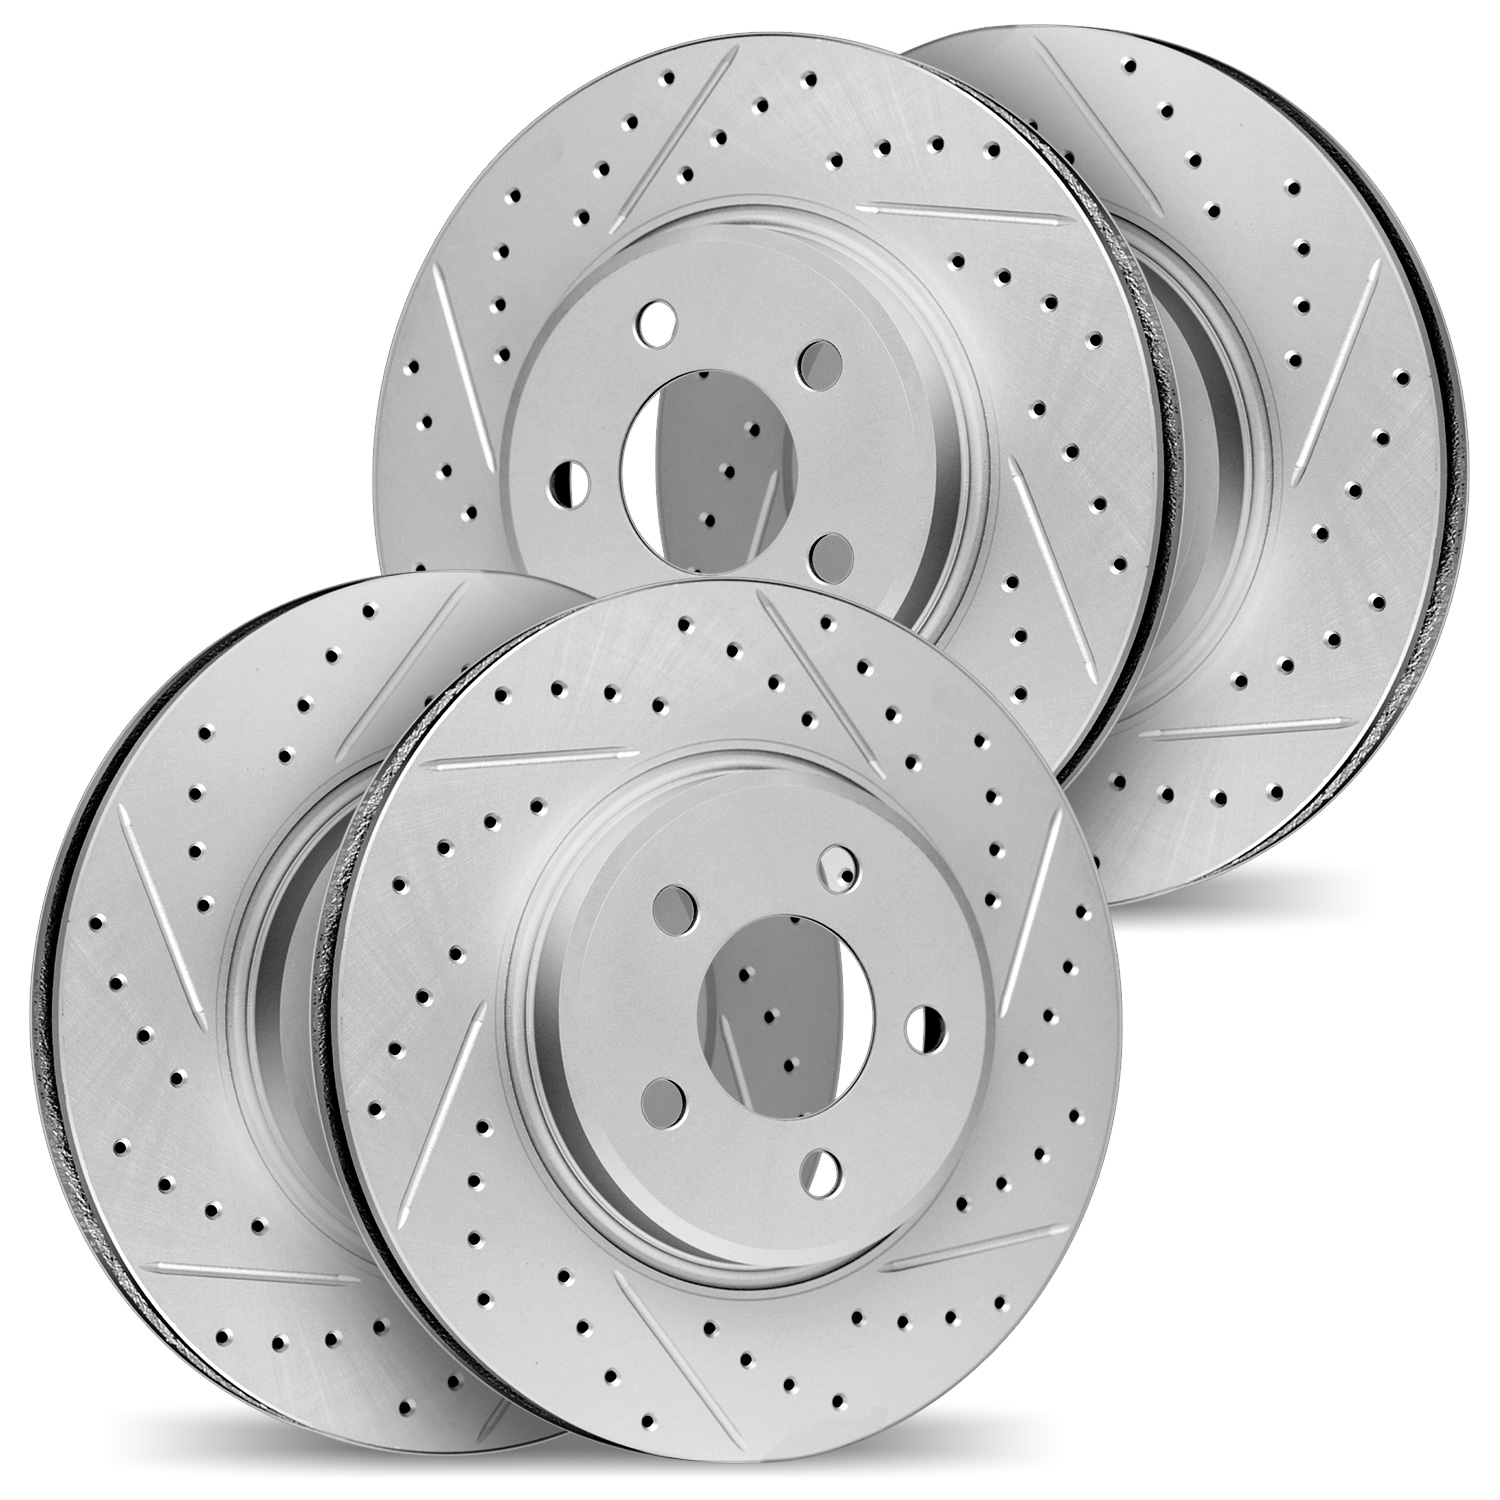 2004-75020 Geoperformance Drilled/Slotted Brake Rotors, 2007-2017 Lexus/Toyota/Scion, Position: Front and Rear